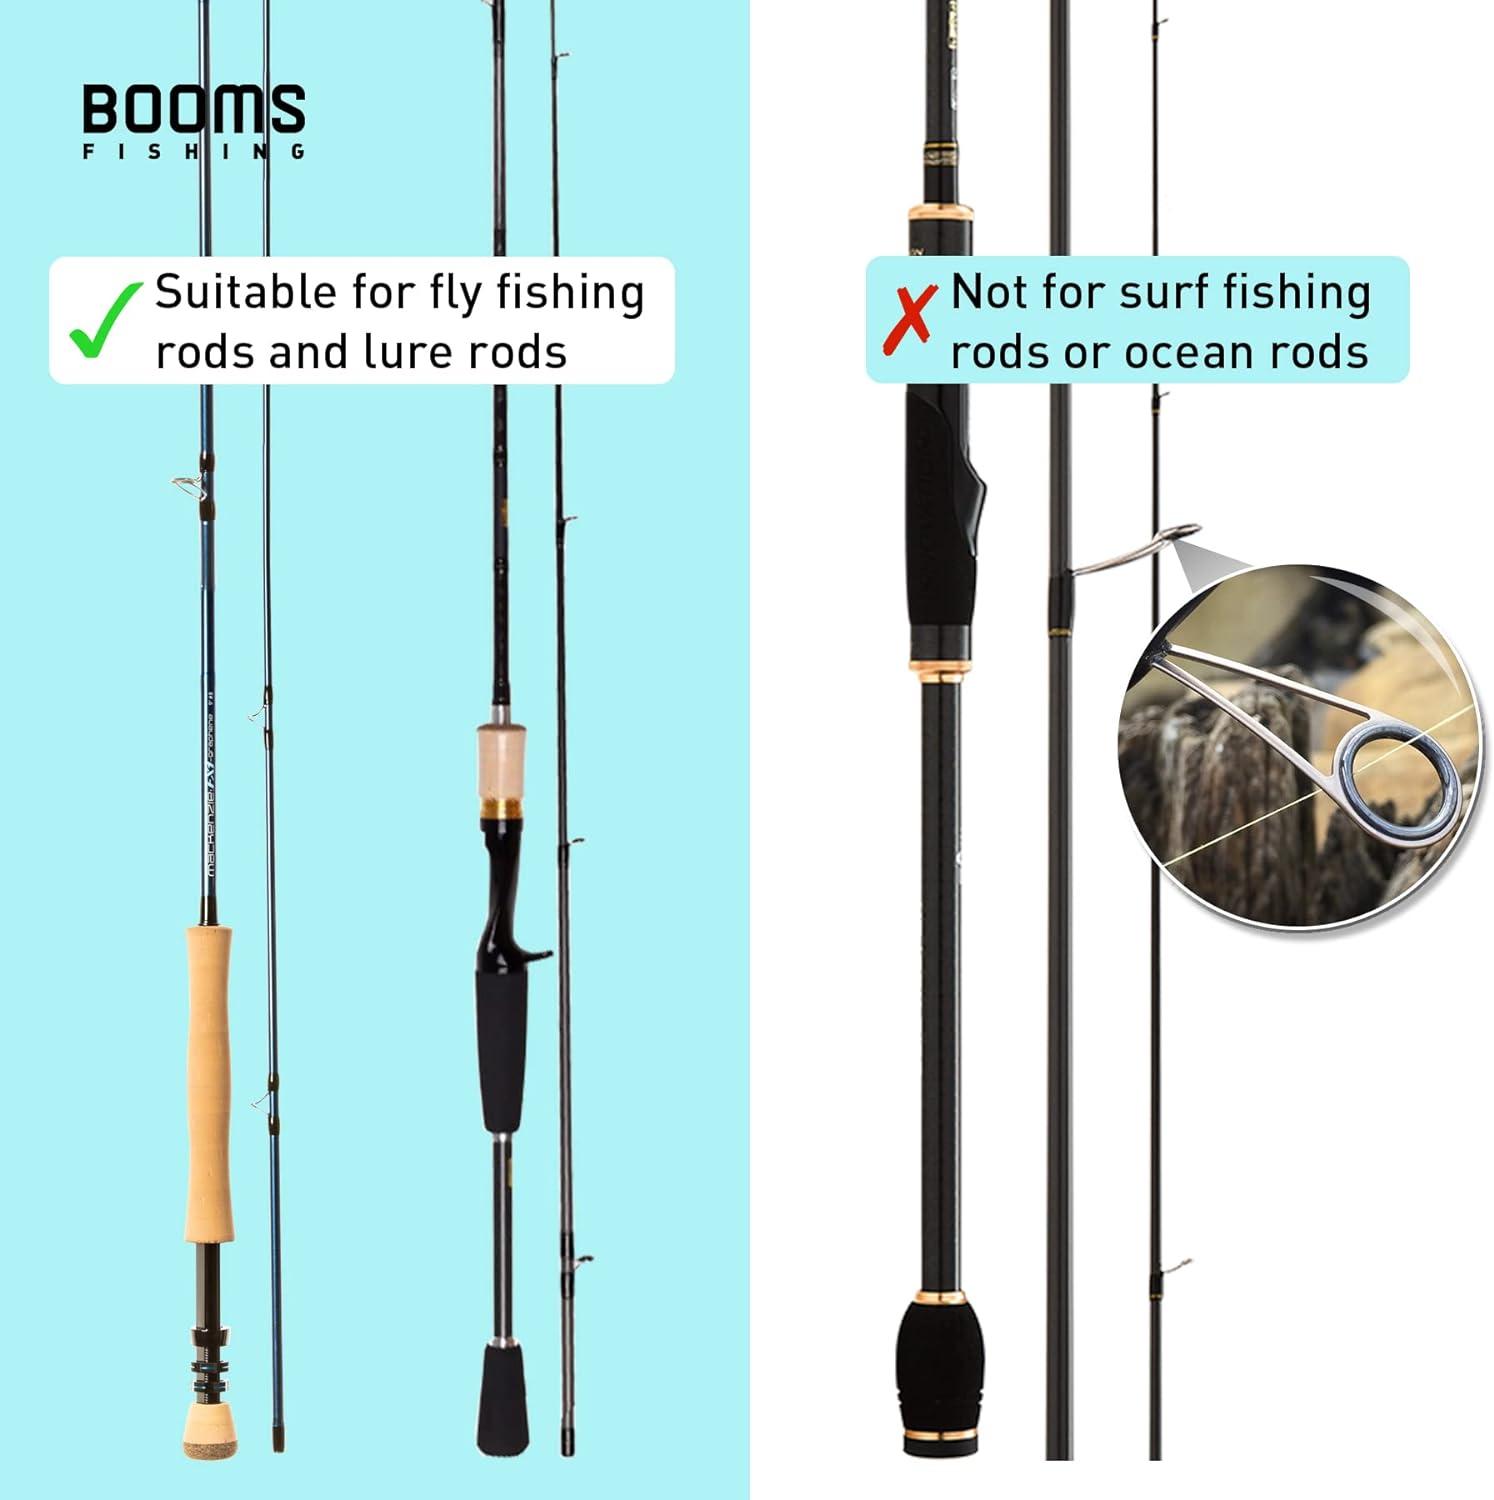 Booms Fishing PB3/PB4 Fishing Rod Case Portable Folded Fishing Pole Case  0.6ft Hidden Extended Design Fishing Rod Bag Store Up to 2 3 Fishing Poles  or Fishing Rods with Reels 5 Styles